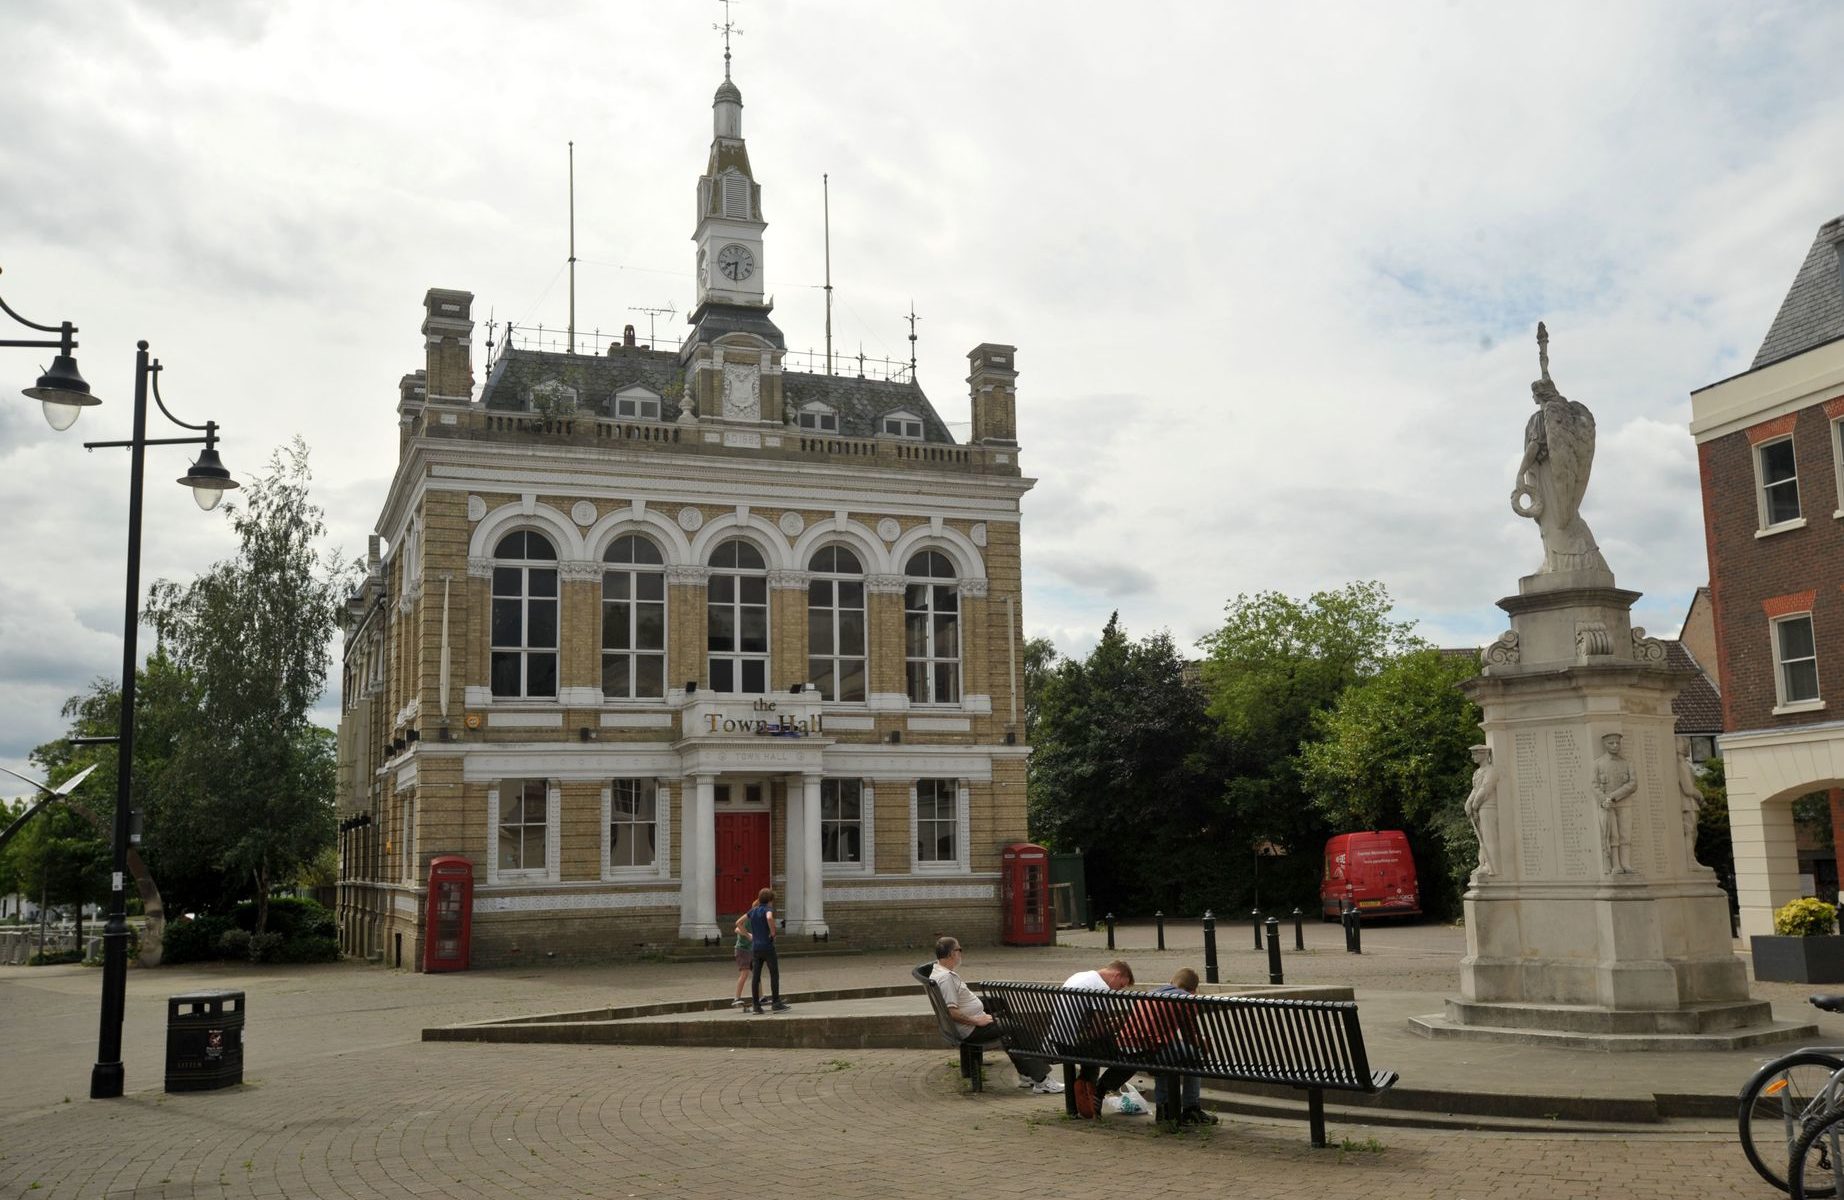 Town Hall Market Square Staines